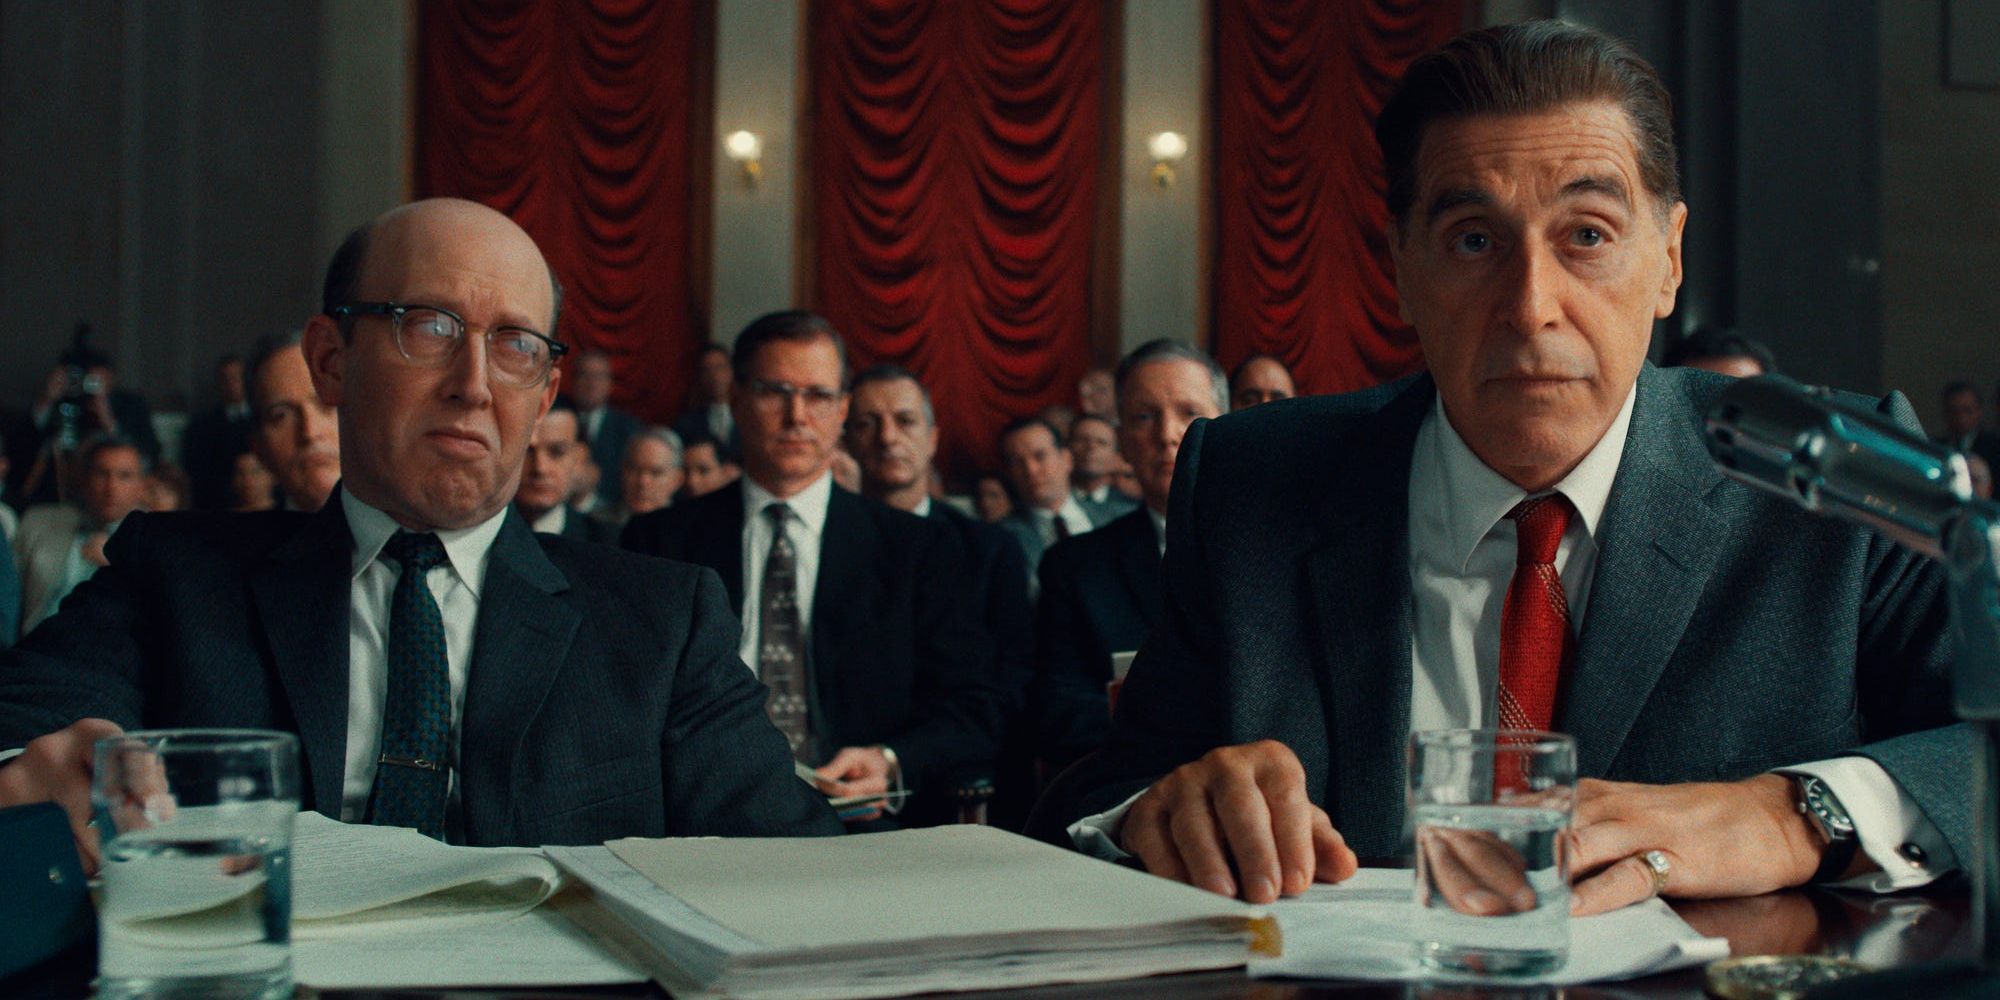 Al Pacino at a defendant's table in court during The Irishman.